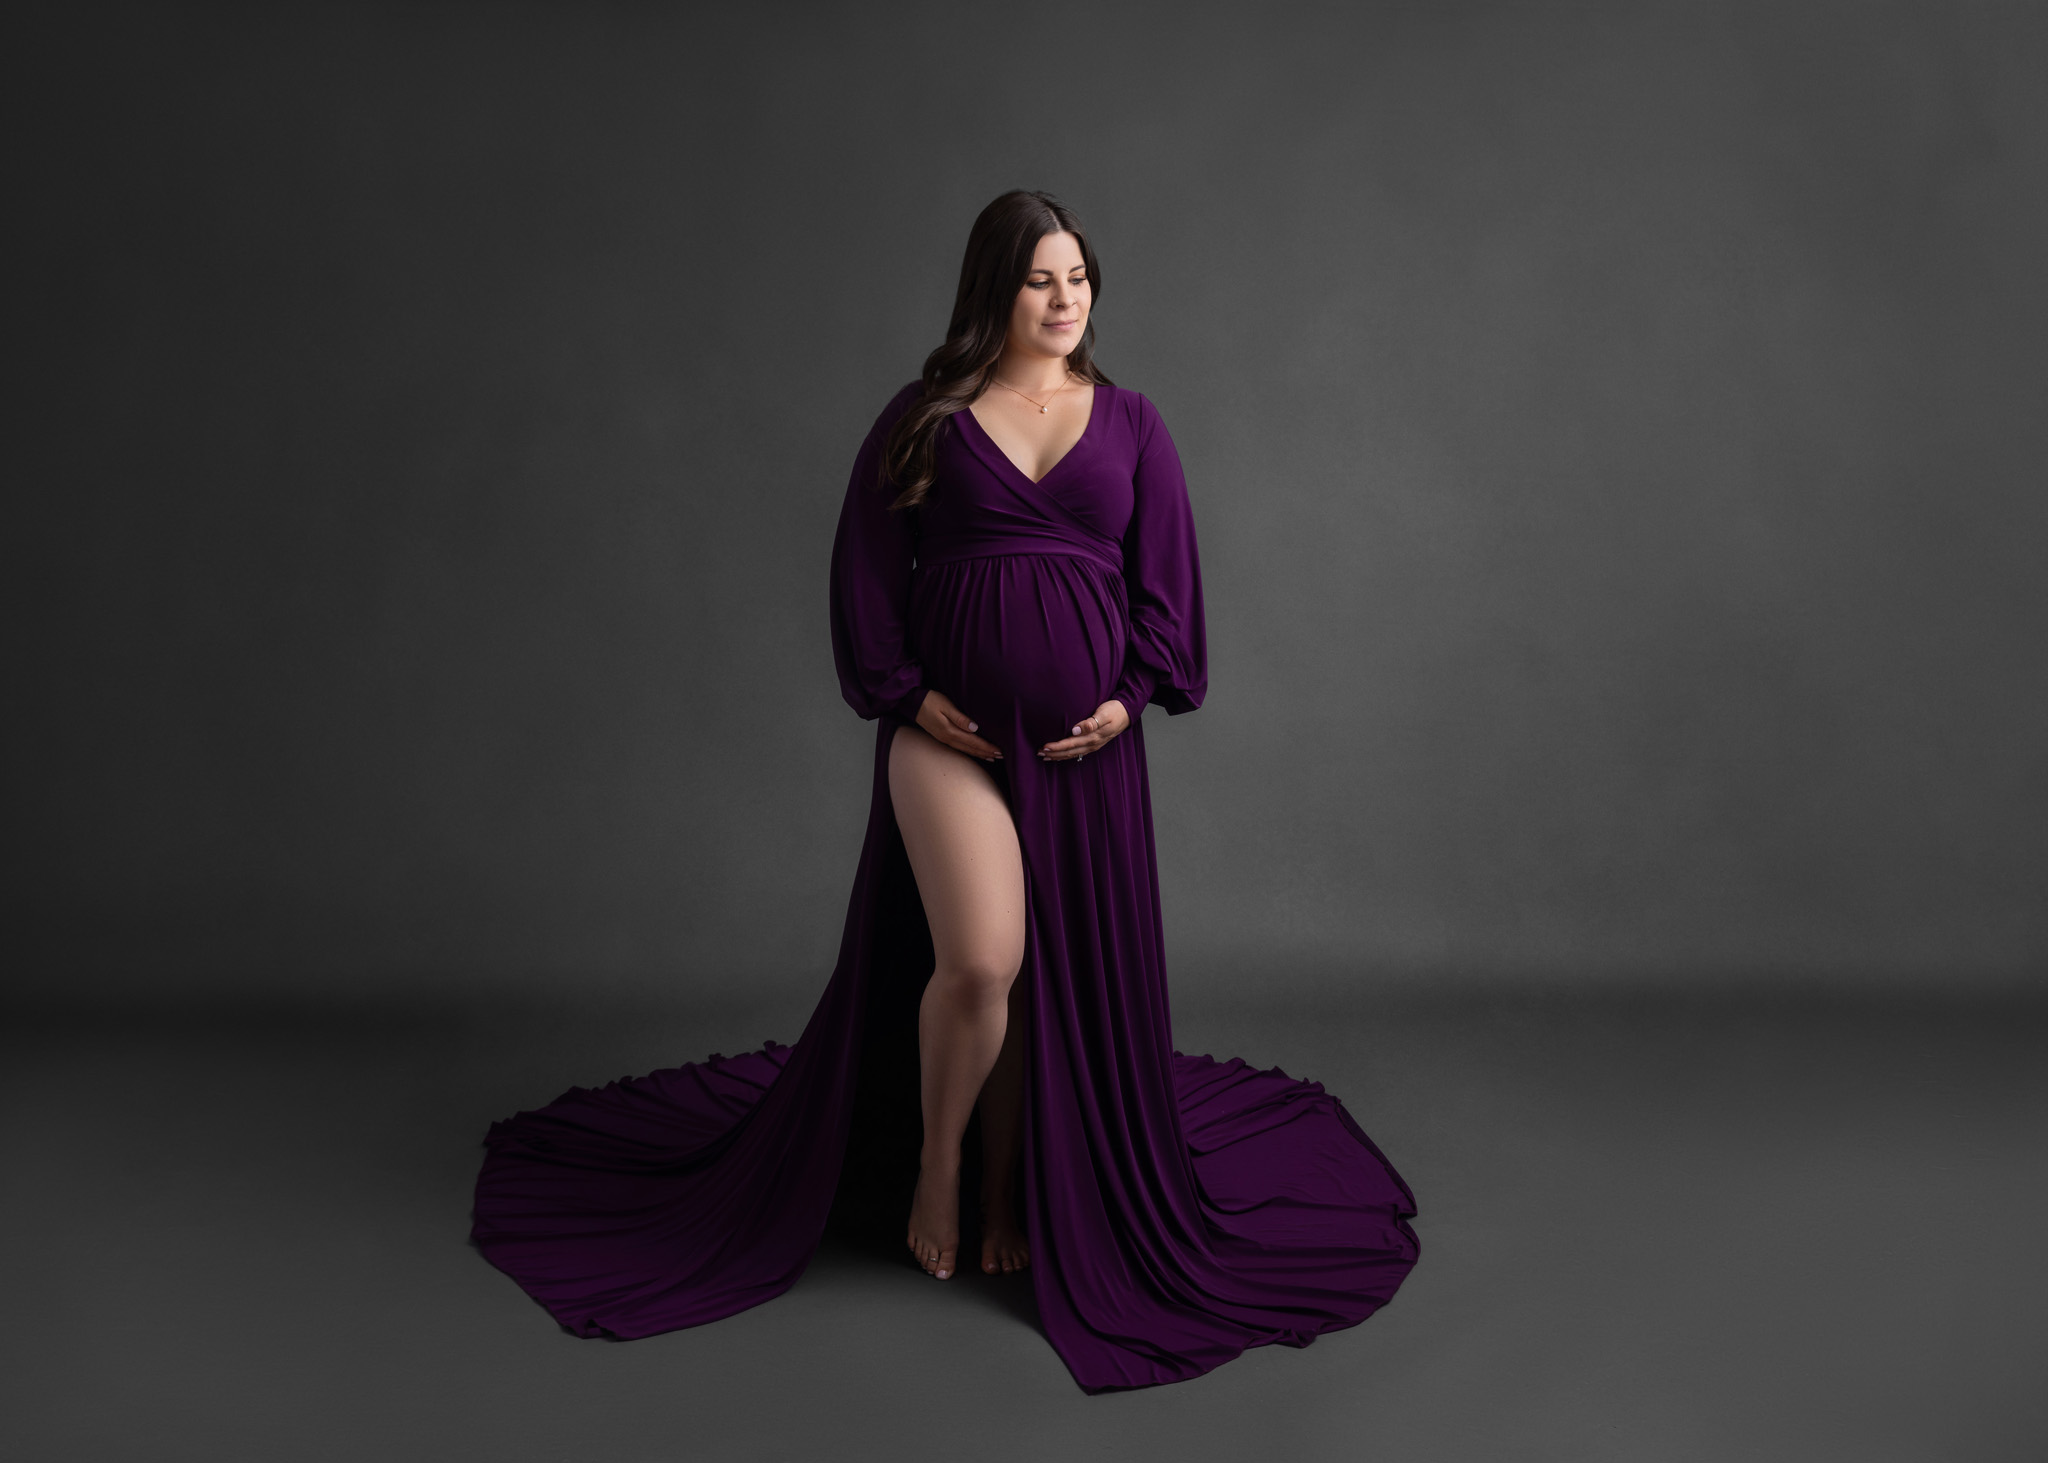 pregnant woman in a vibrant purple flowy dress standing in front of a dark grey backdrop holding her belly with both hands looking off to the distance